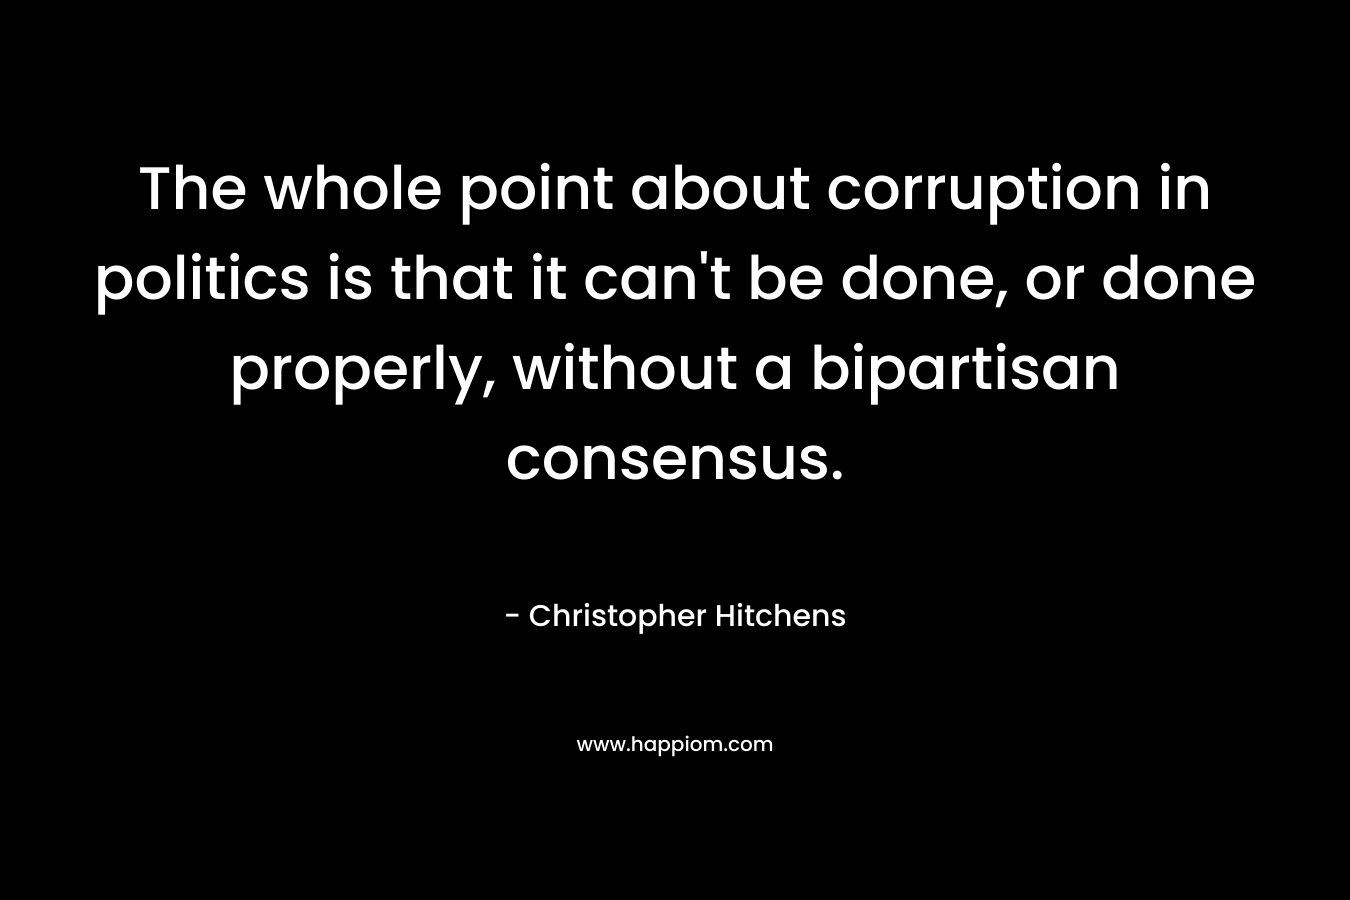 The whole point about corruption in politics is that it can't be done, or done properly, without a bipartisan consensus.